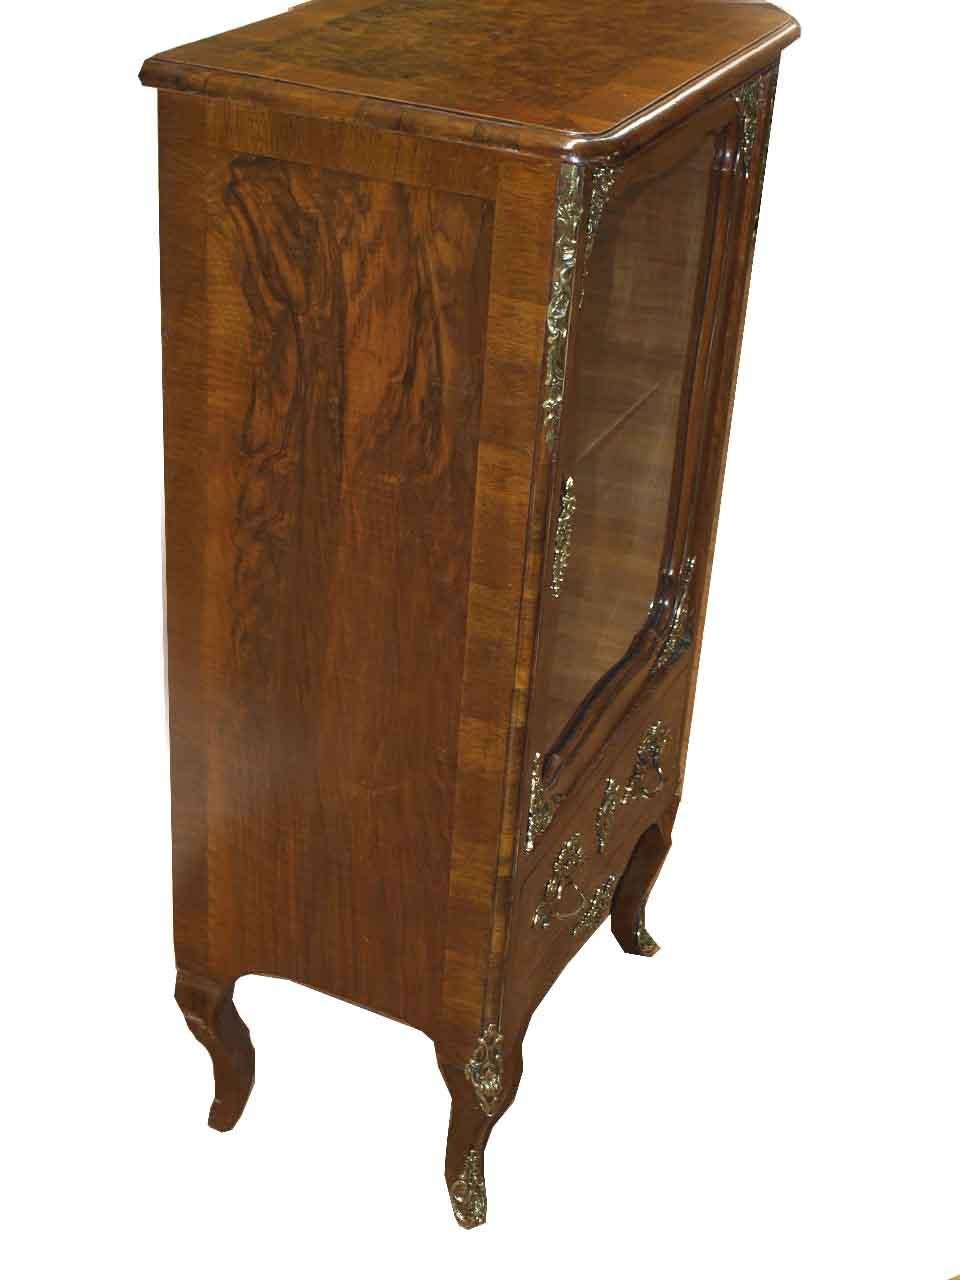 French walnut glass door display cabinet, the top, sides and drawer with burl walnut veneer and cross banded edges,  brass ormolu appliques on the front corner edges, feet and apron, interior with single shelf; glass door with brass appliques on